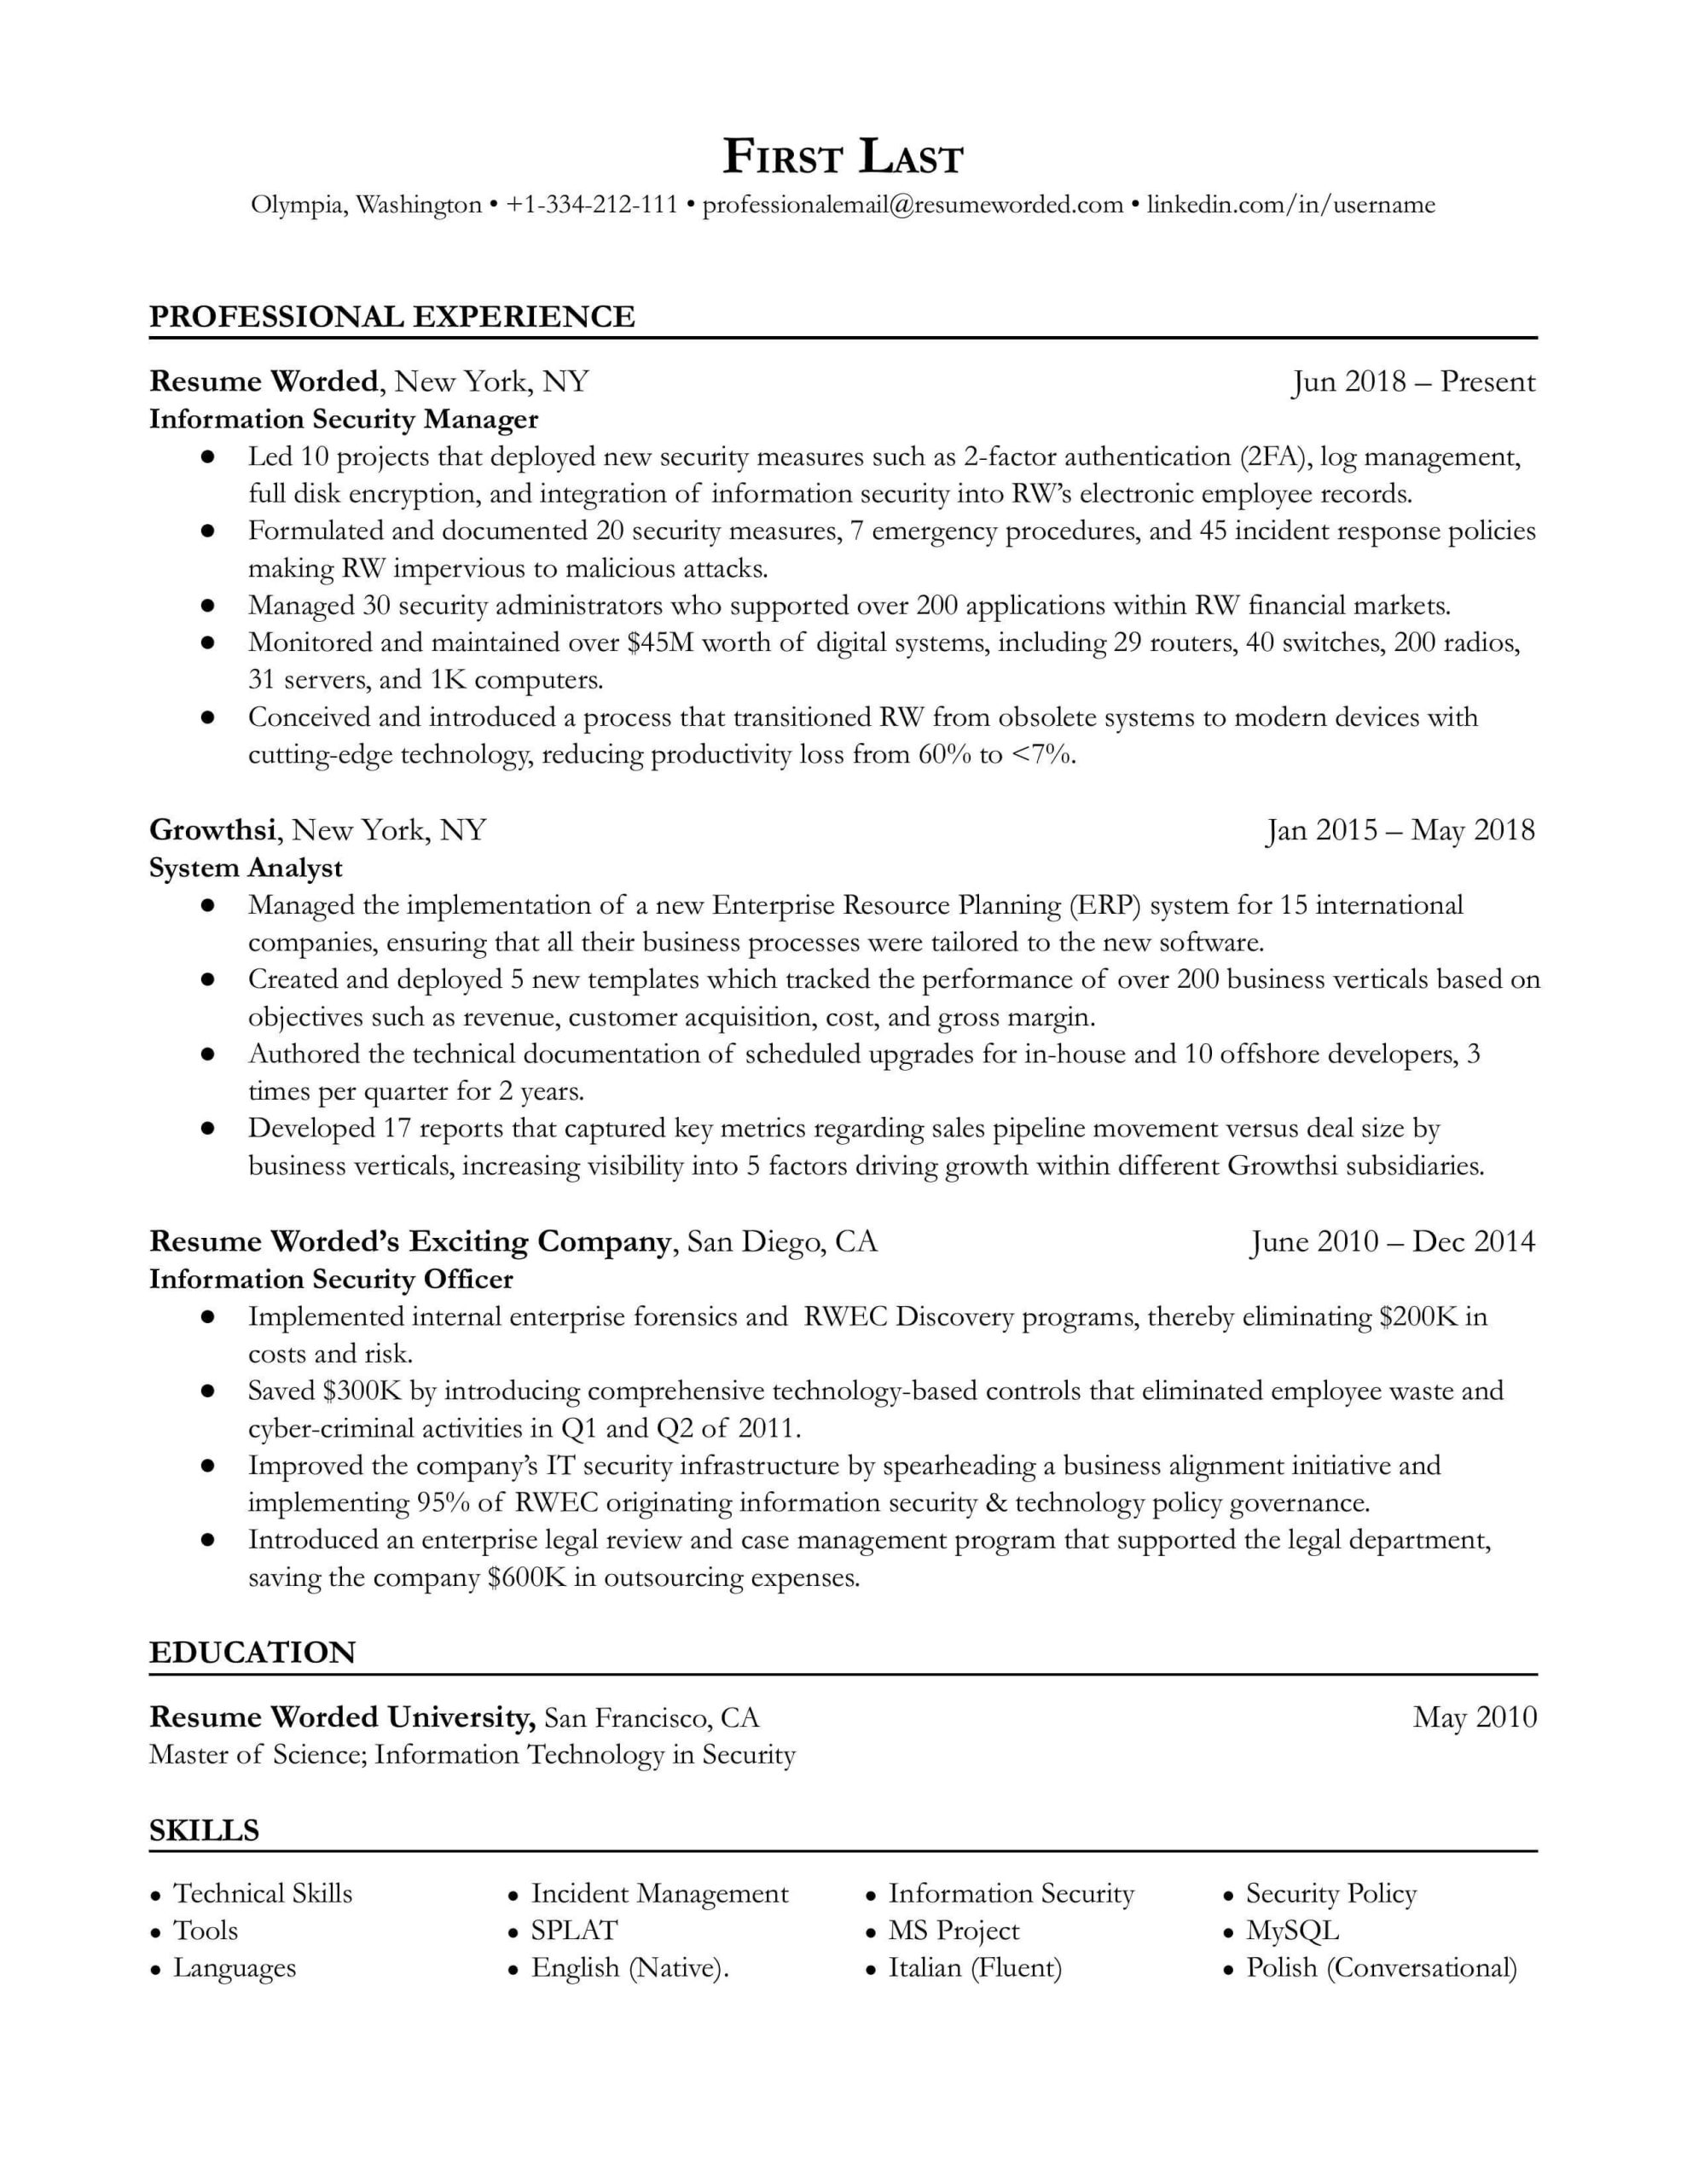 Sample Resume for Security Manager Position Information Security Manager Resume Example for 2022 Resume Worded